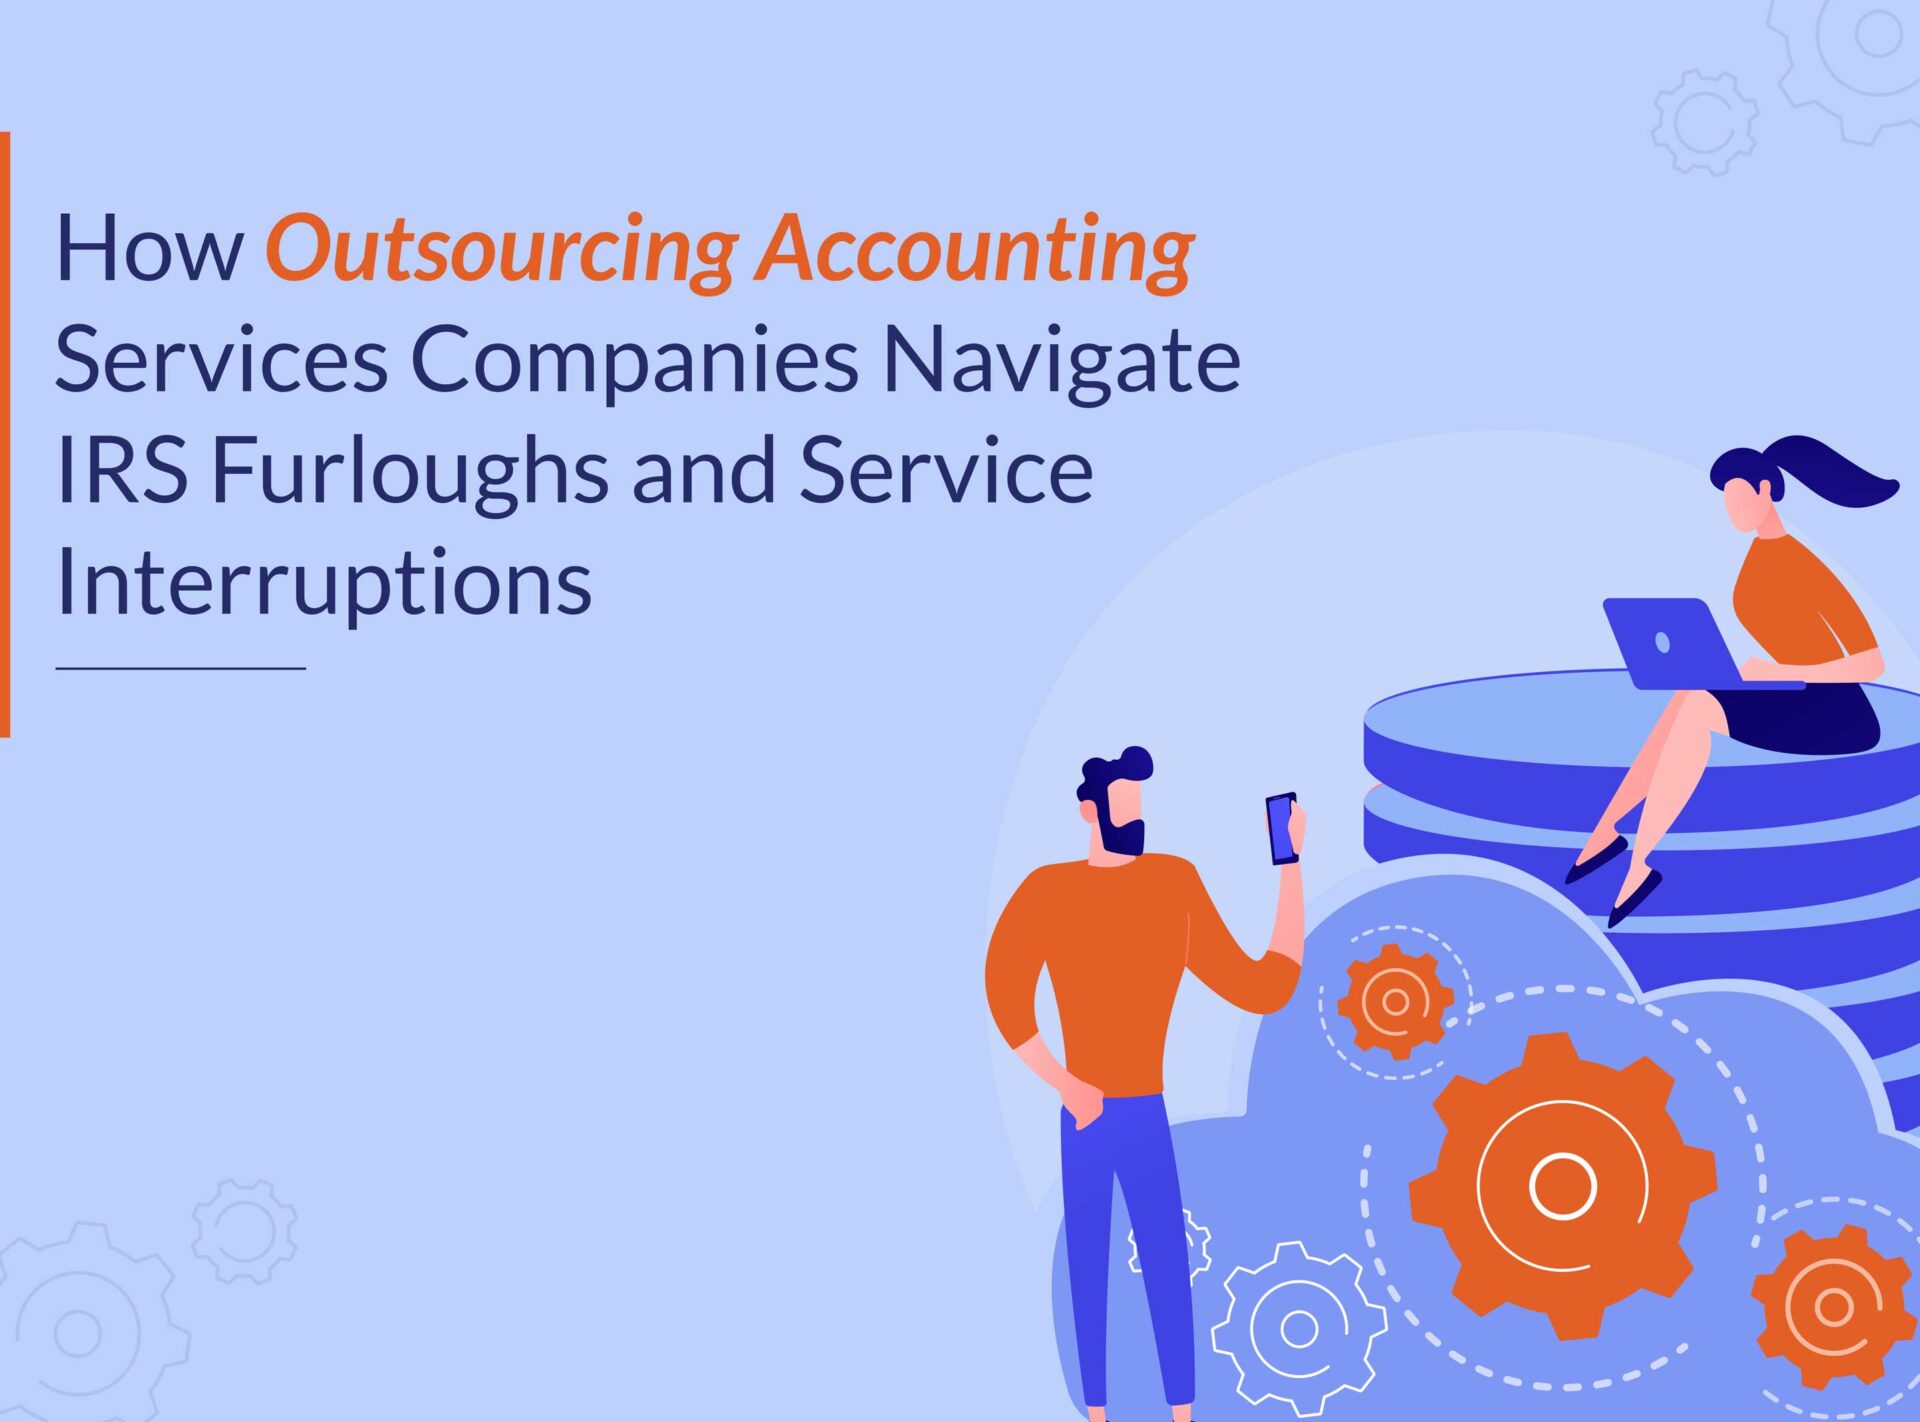 IRS Shutdown Impact on Outsourcing Accounting